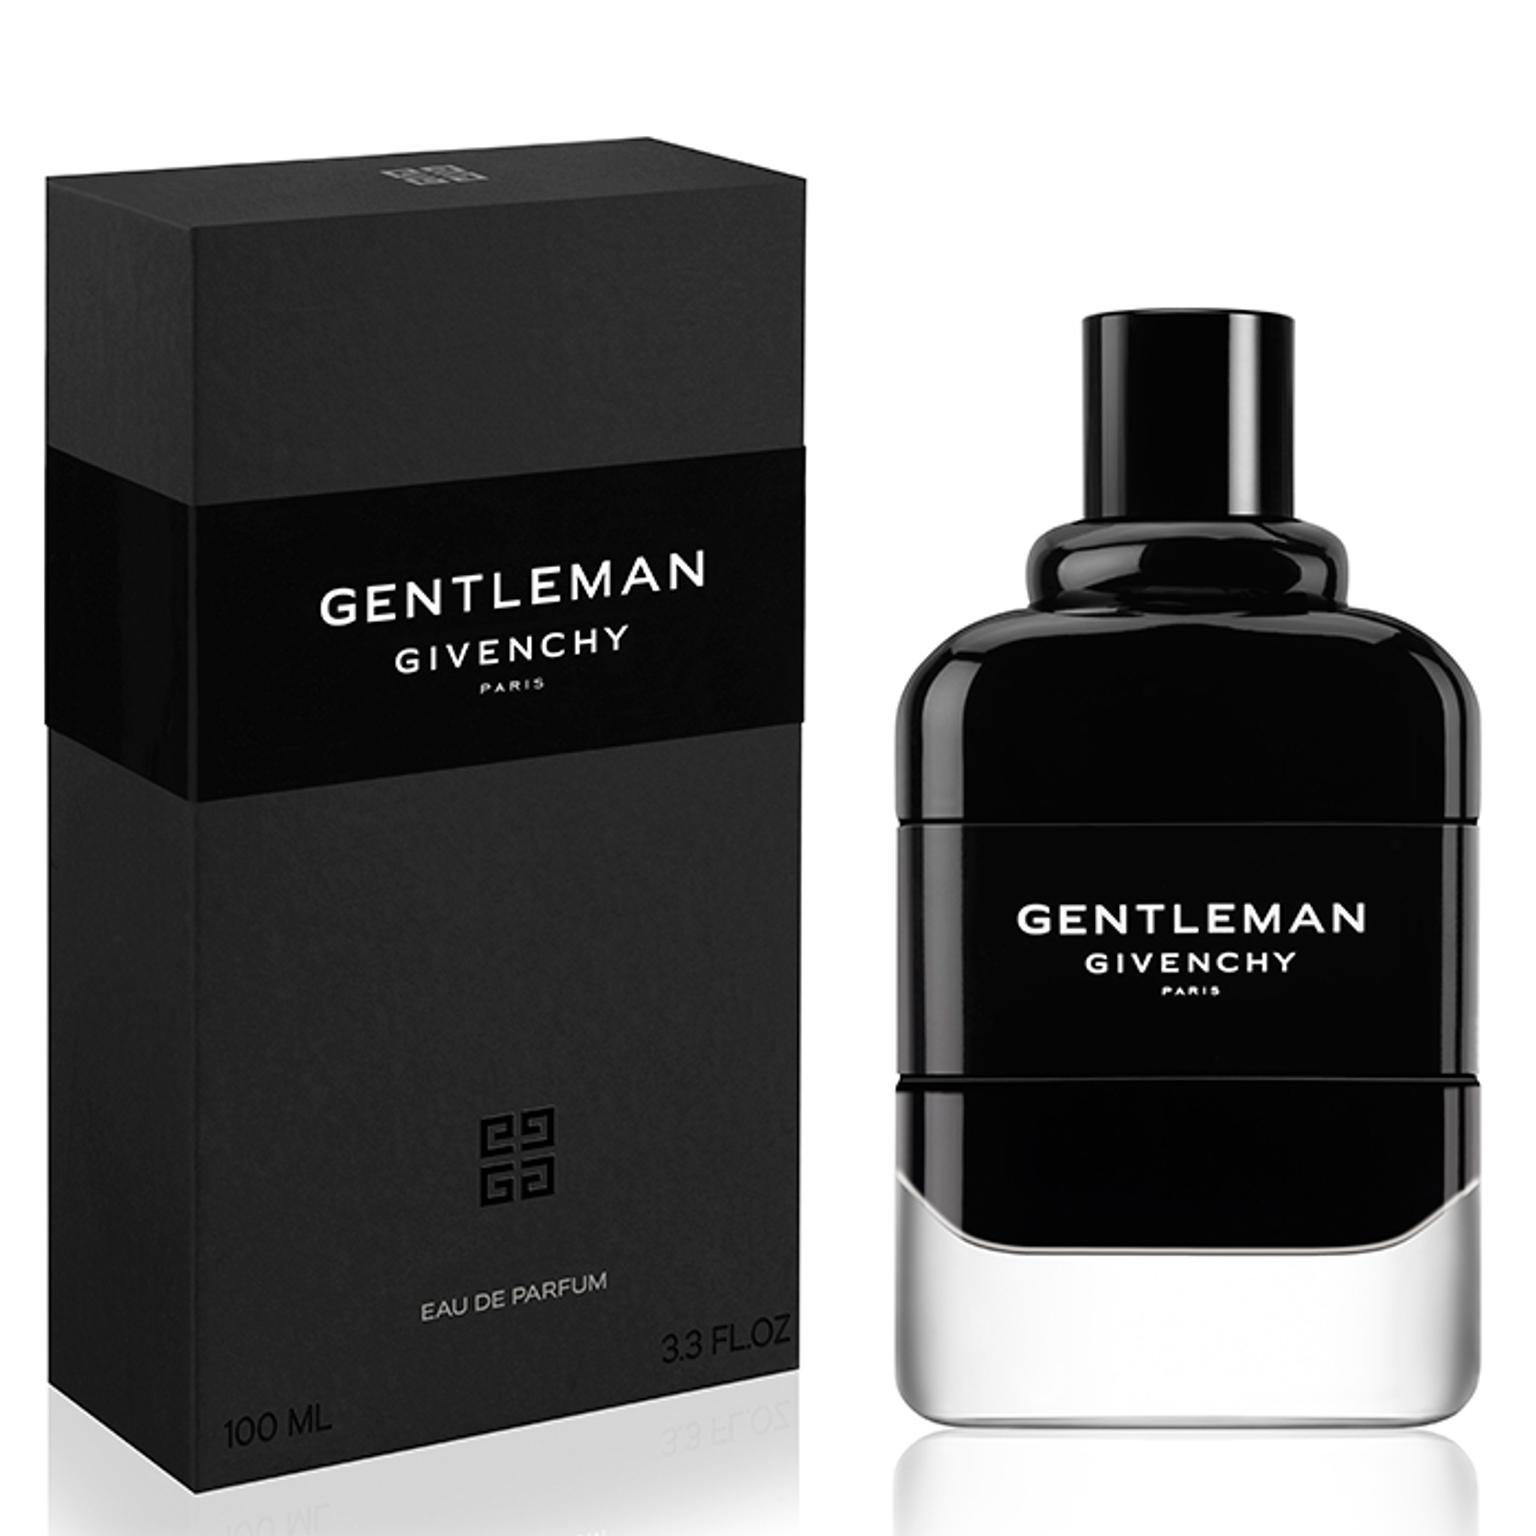 ORIGINAL GIVENCHY GENTLEMAN 100ml EDP in SL1 for £40.00 for sale | Shpock